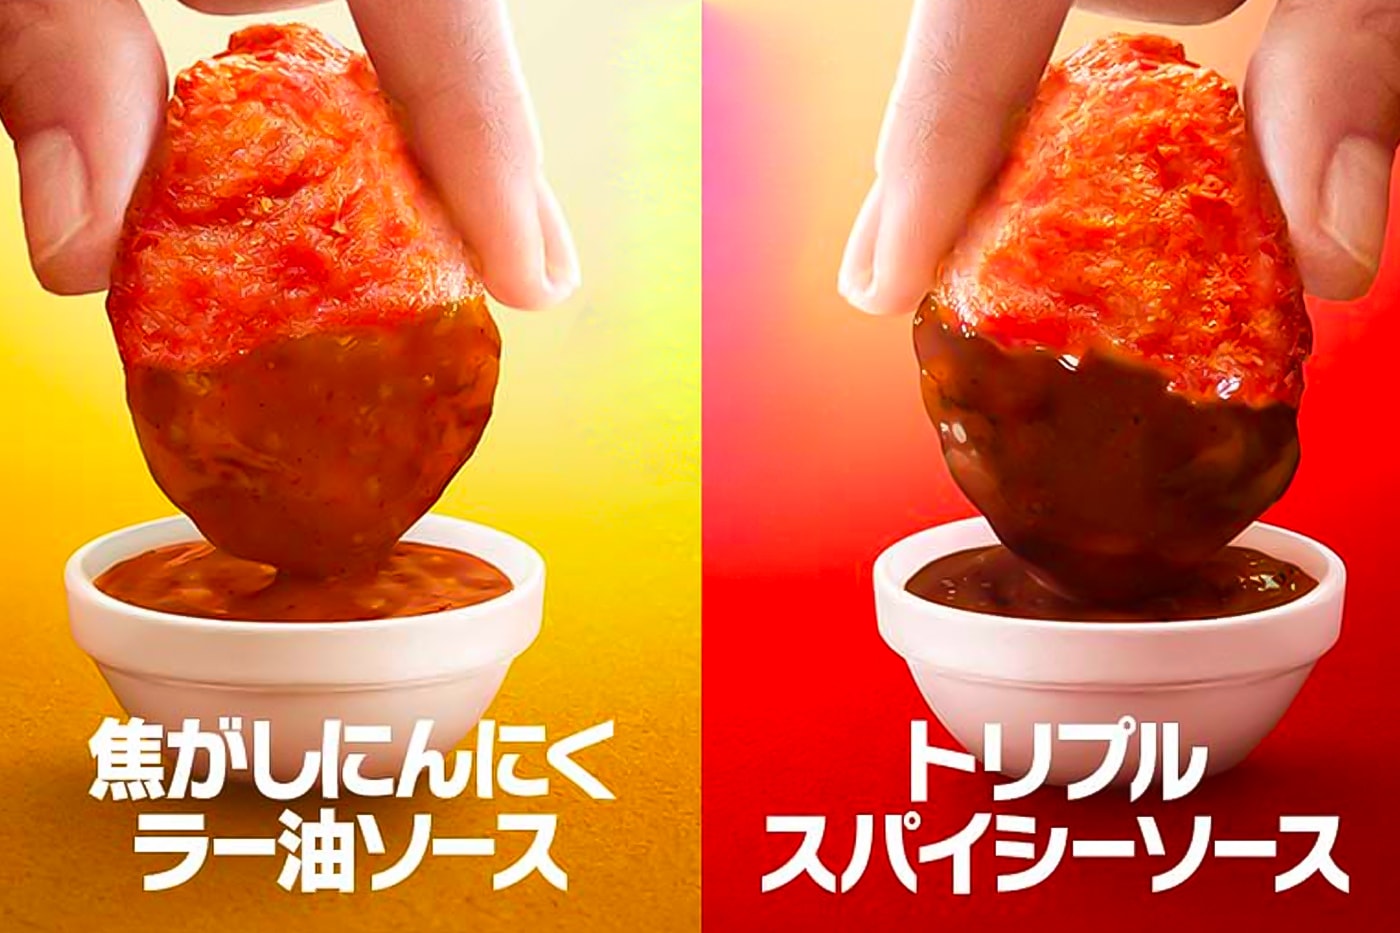 McDonalds Japan Spicy Chicken McNugget Scorched garlic chili oil Triple spicy release fast food 